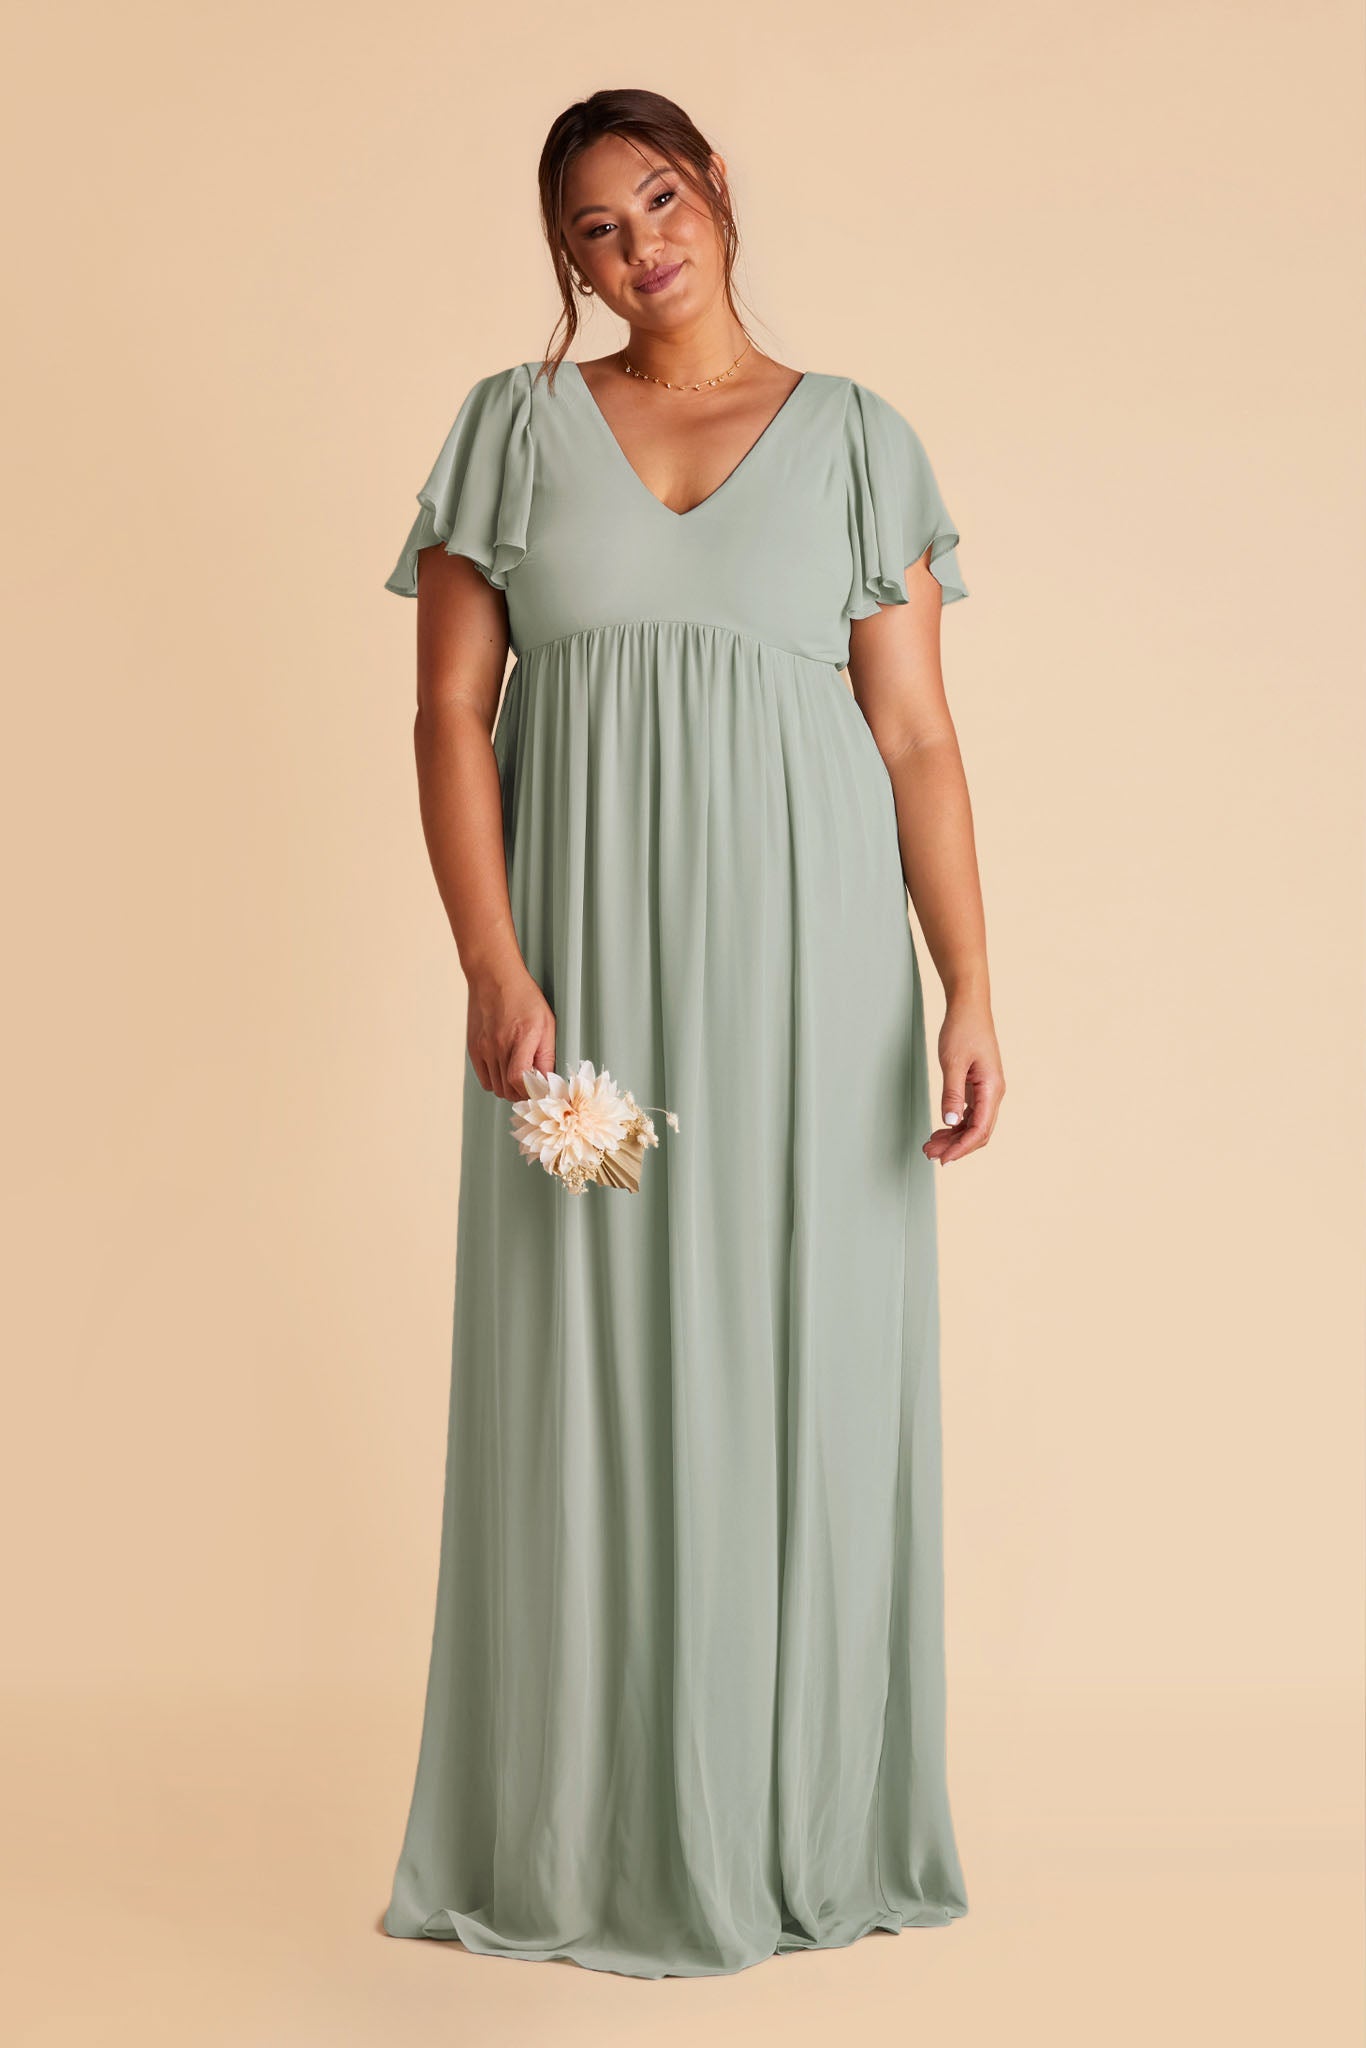 Hannah empire plus size bridesmaid dress in sage green chiffon by Birdy Grey, front view